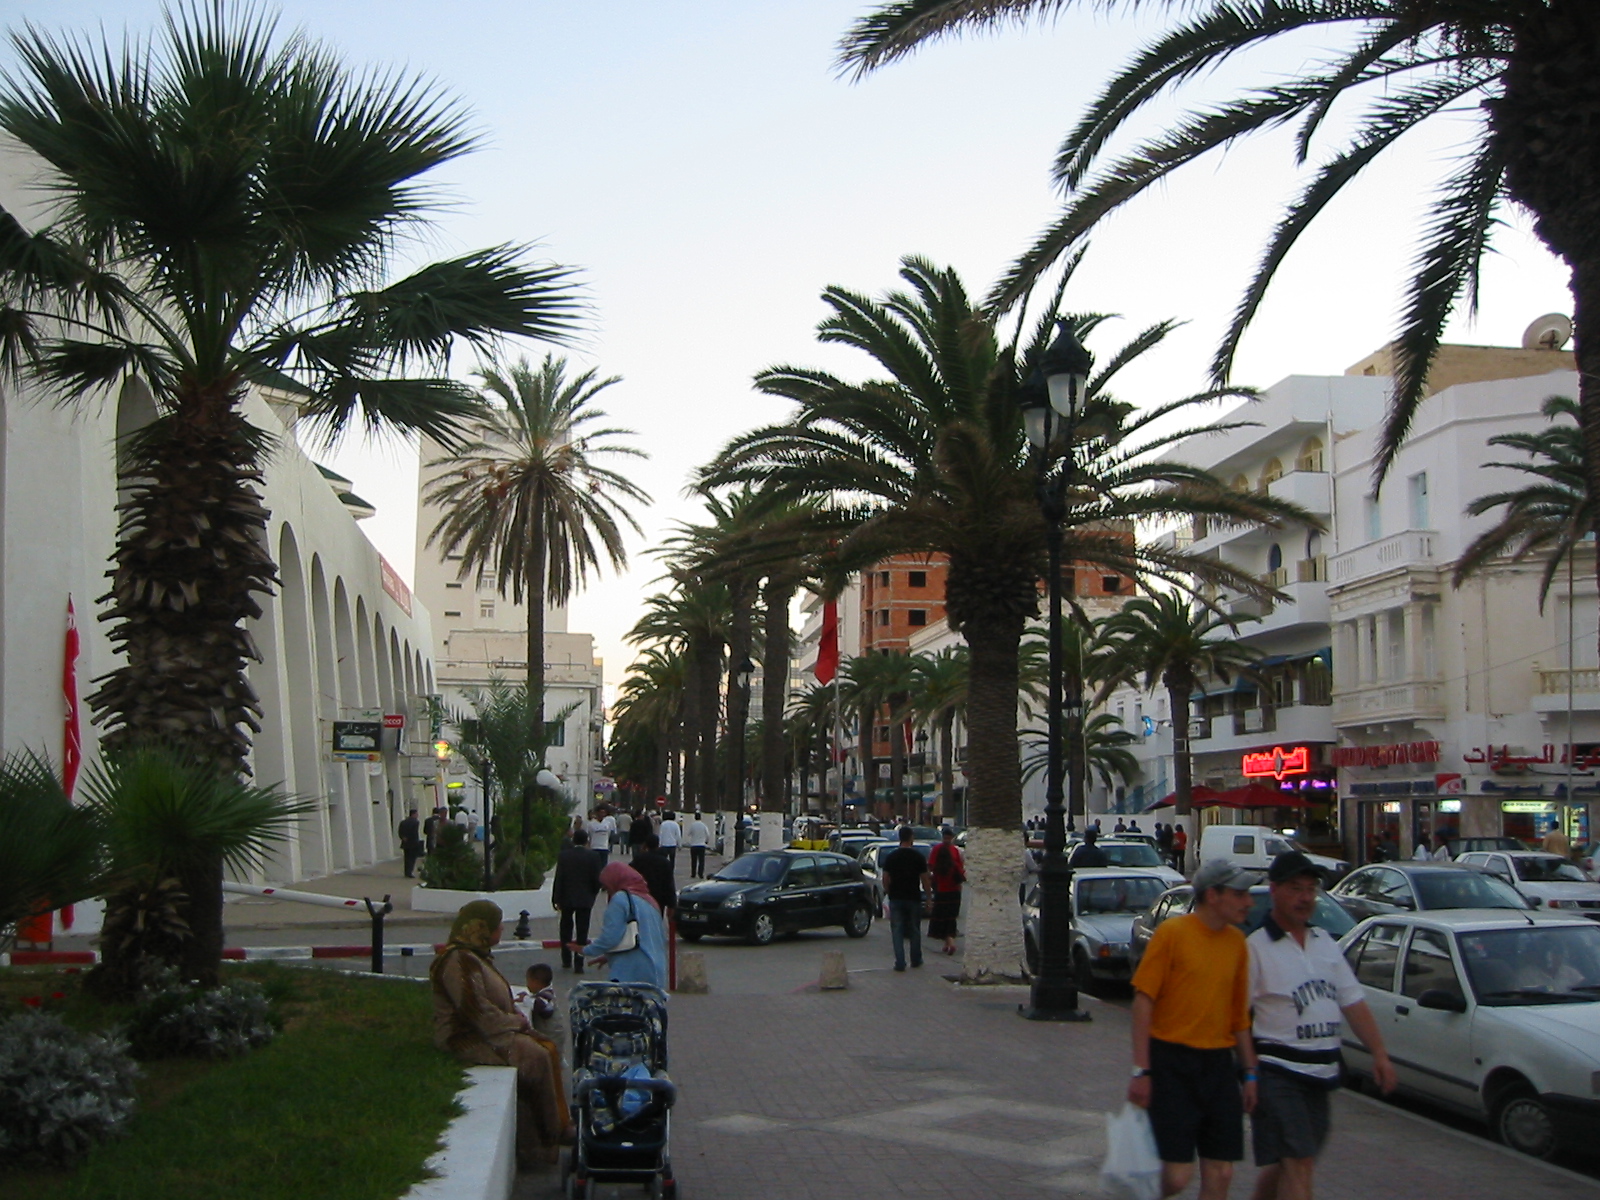 people on a sidewalk with cars and palm trees